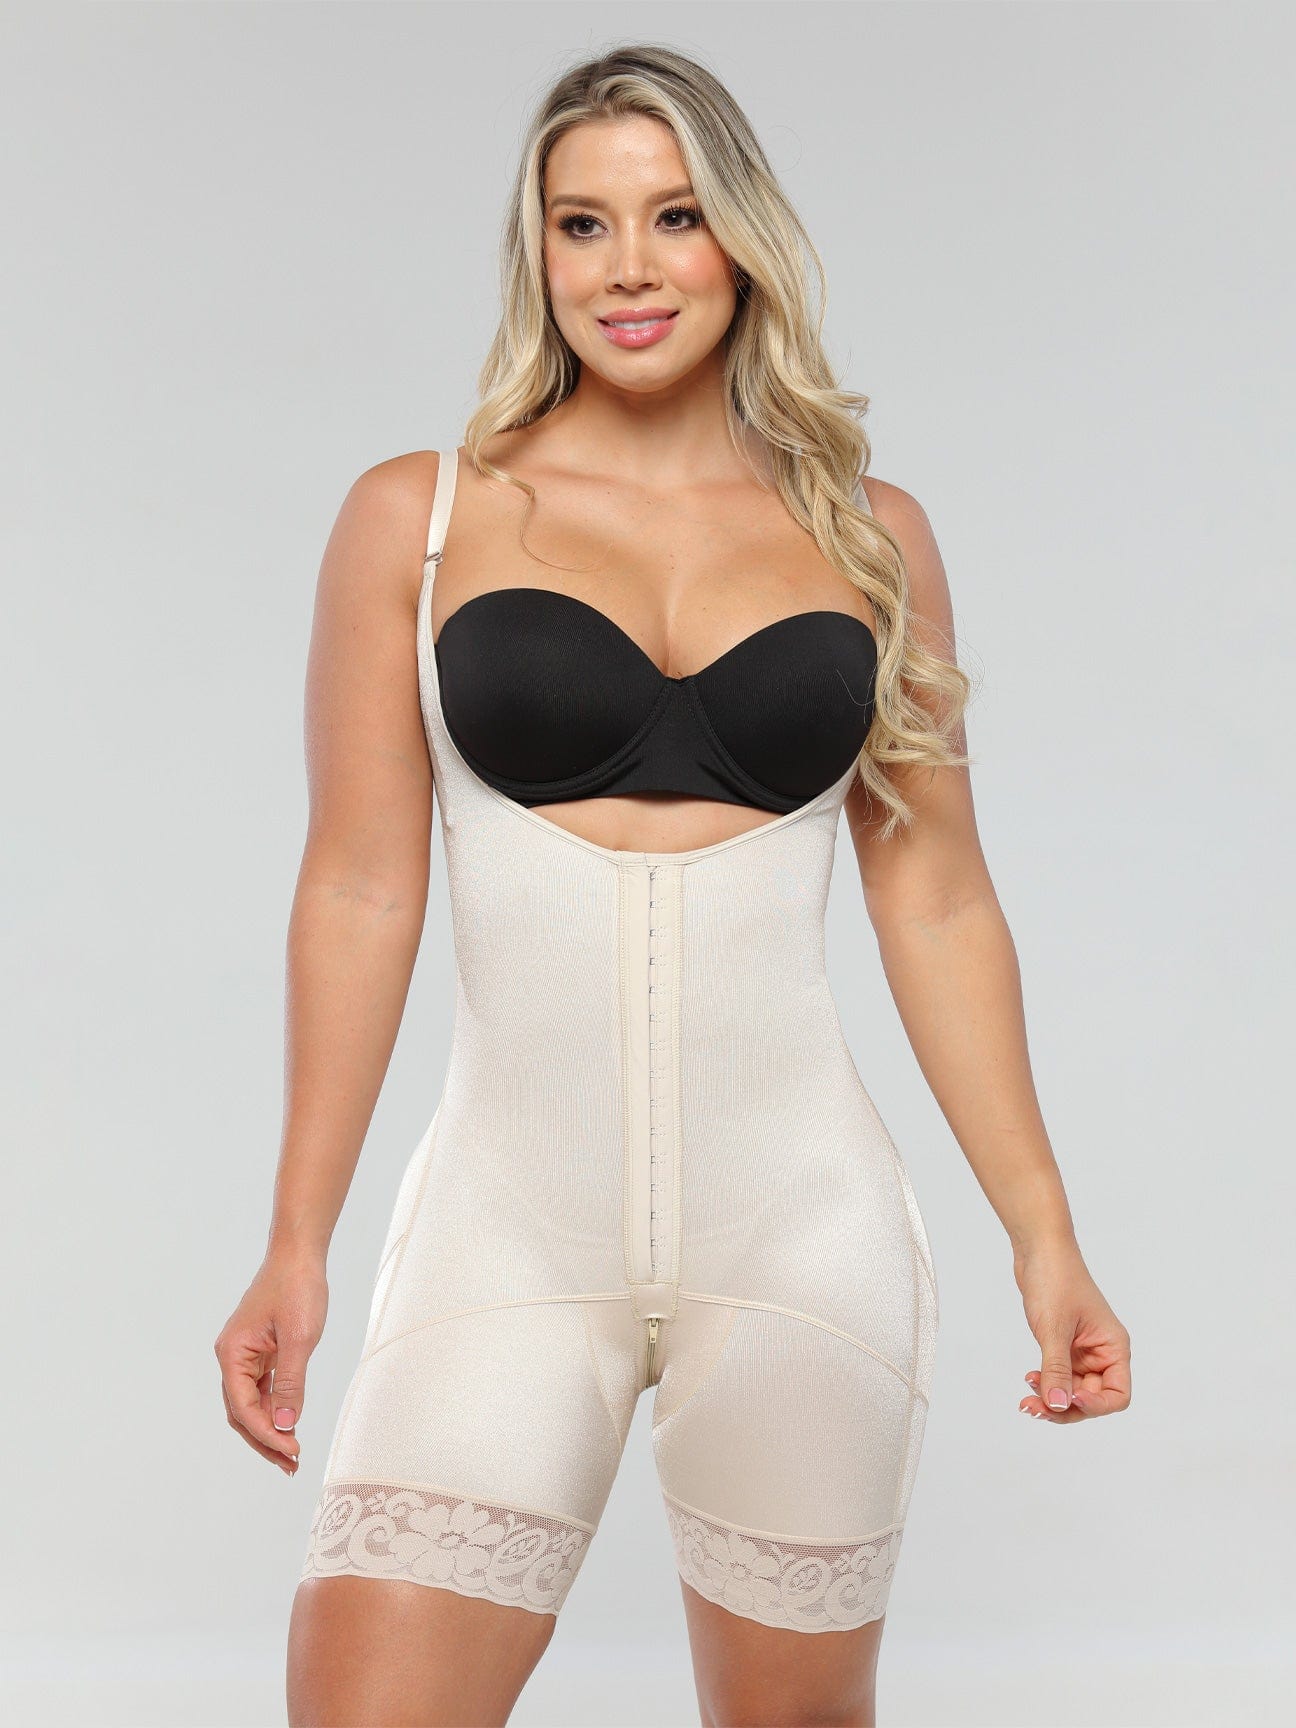 The best postpartum shapewear for every body type - Confessions Of